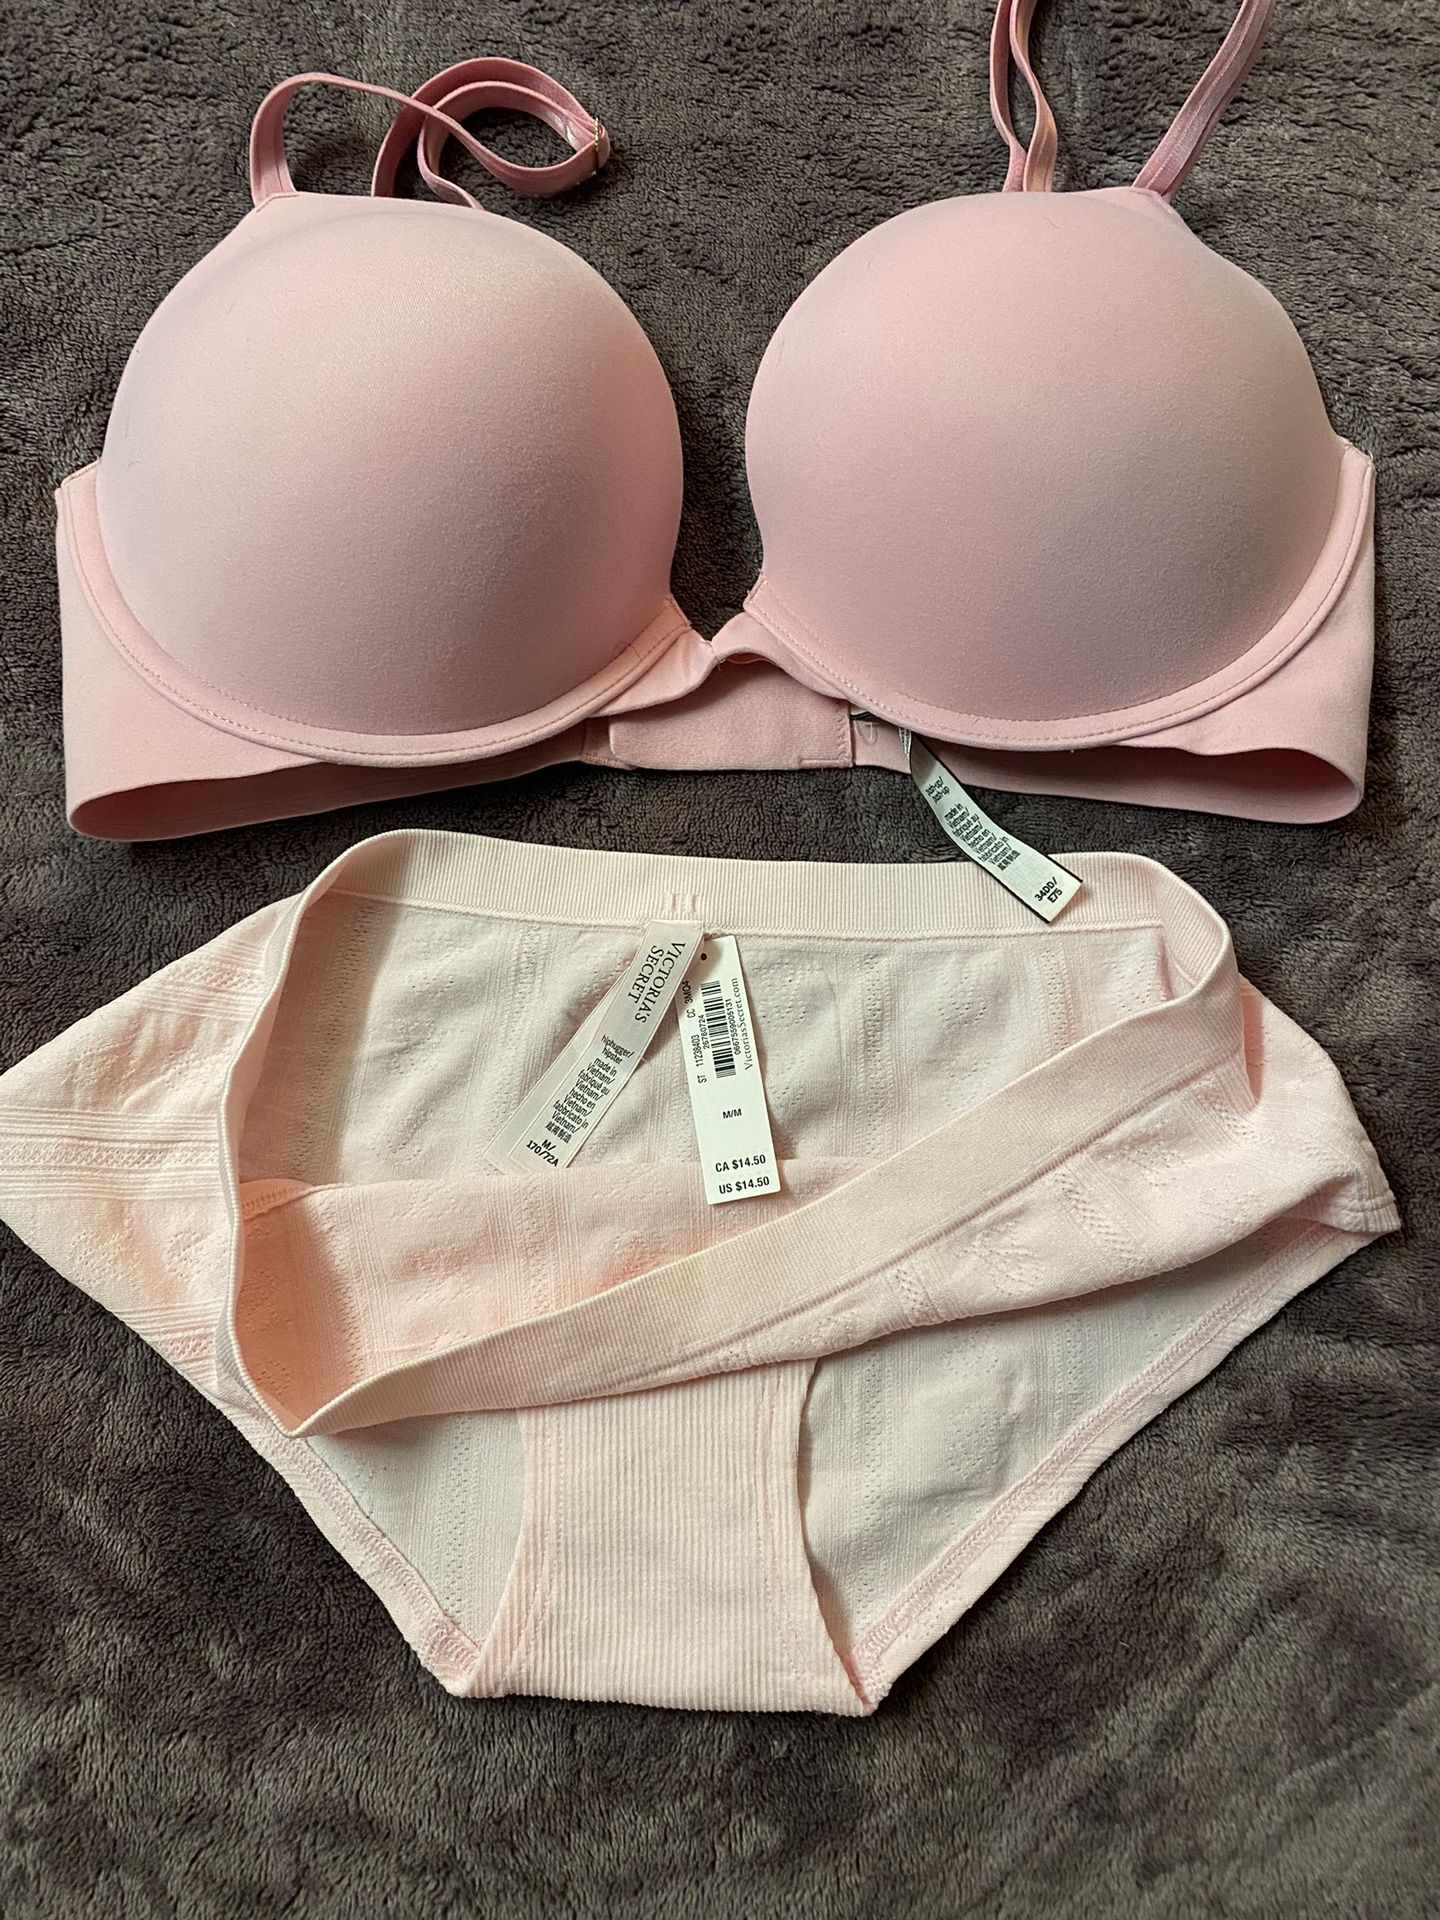 Love Cloud Push Up Bra By Victorias Secret.size34DD(E)panties Included.NWT